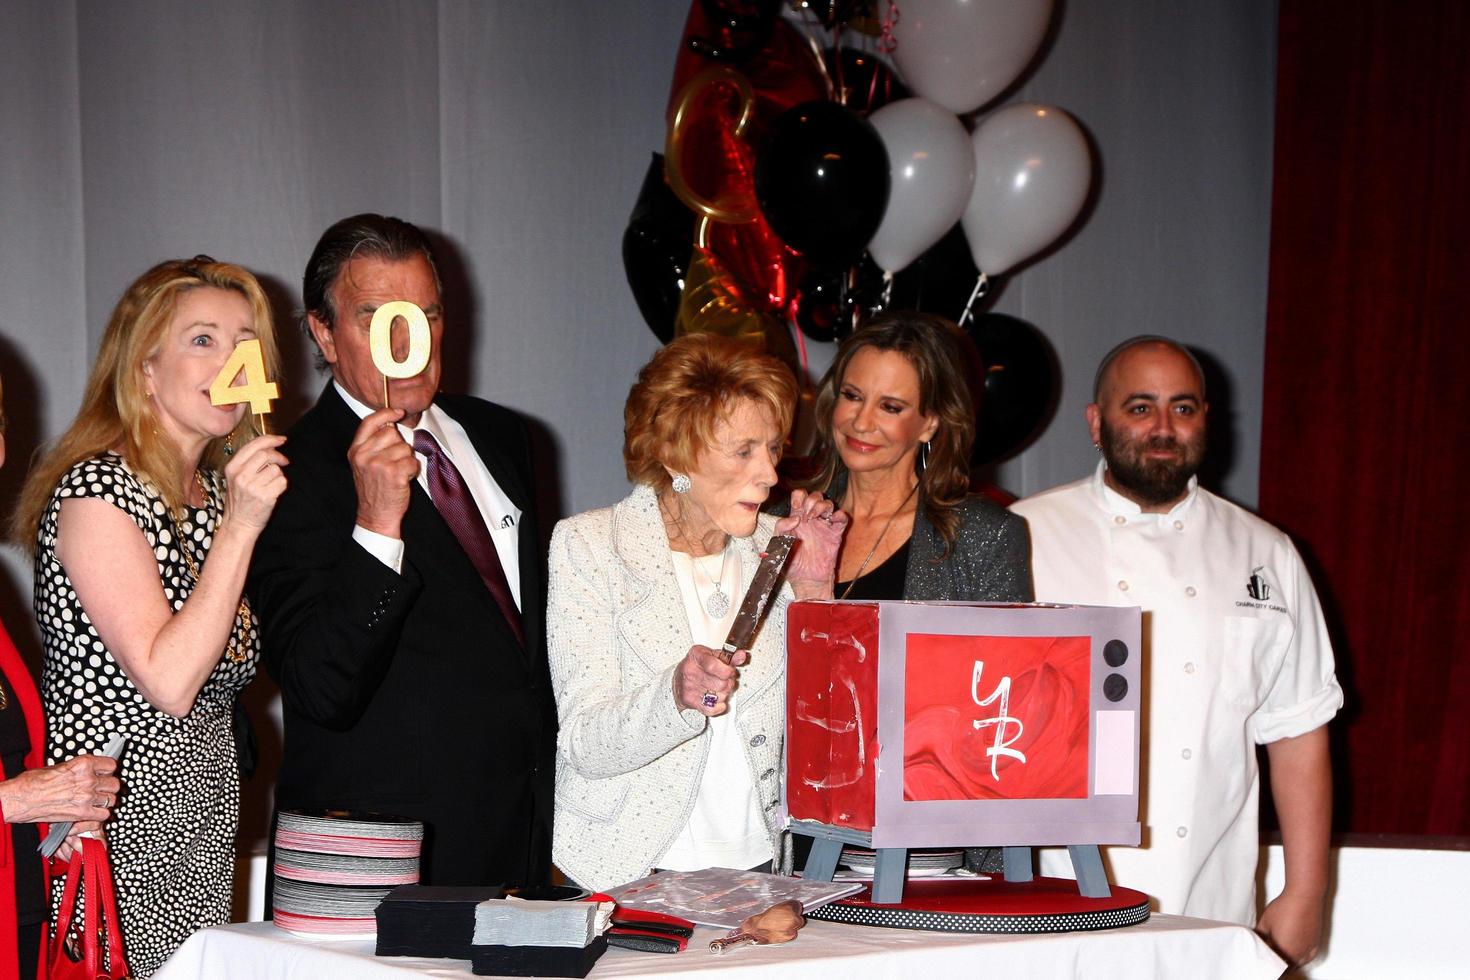 LOS ANGELES, MAR 26 - Melody Thomas Scott, Eric Braeden, Jeanne Cooper, Jess Walton, Duff Goldman attends the 40th Anniversary of the Young and the Restless Celebration at the CBS Television City on March 26, 2013 in Los Angeles, CA photo